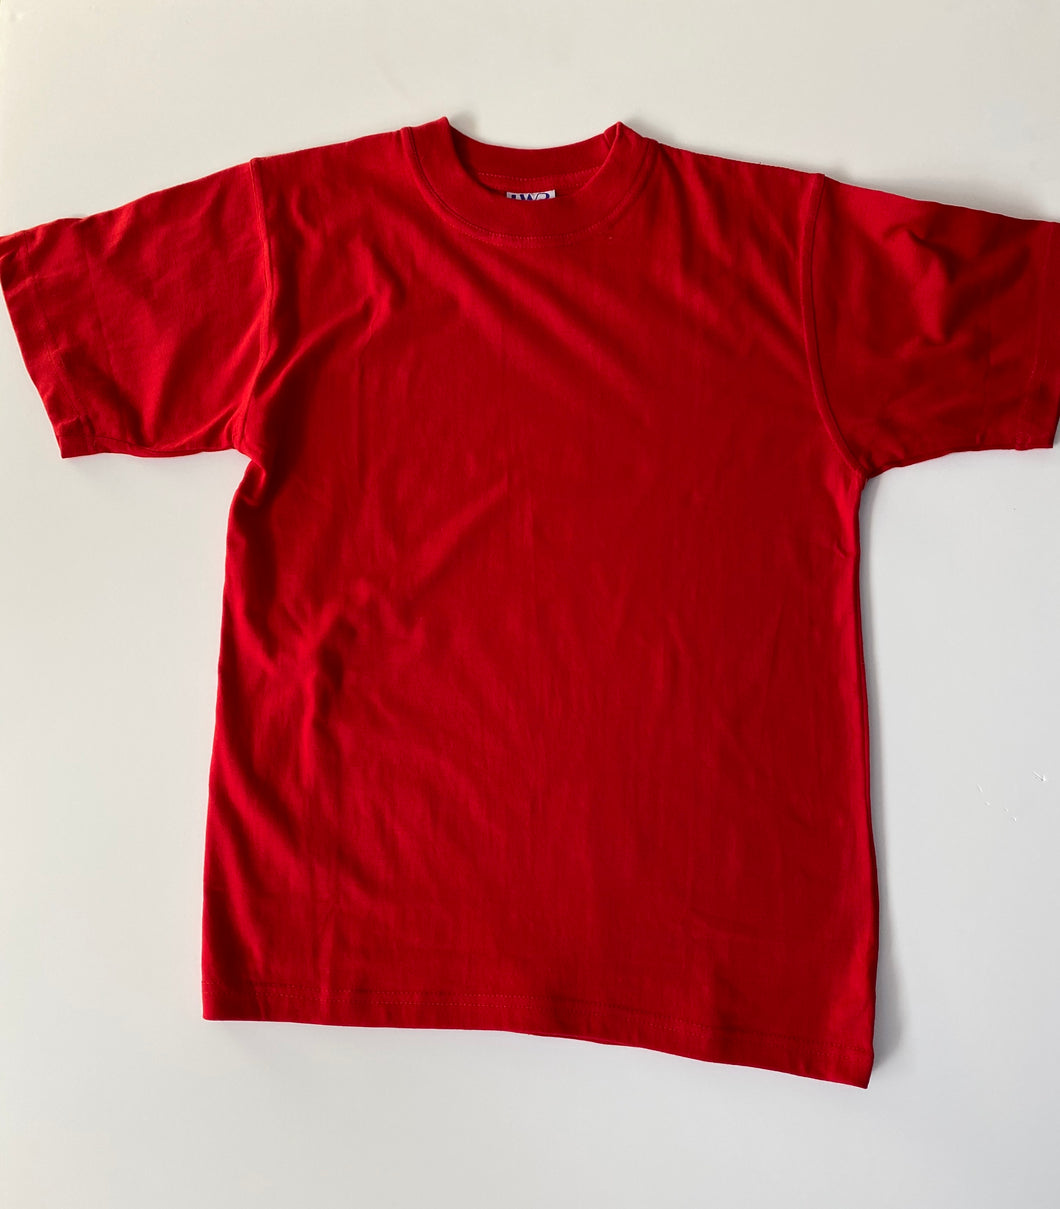 Red House T-Shirt - Old stock